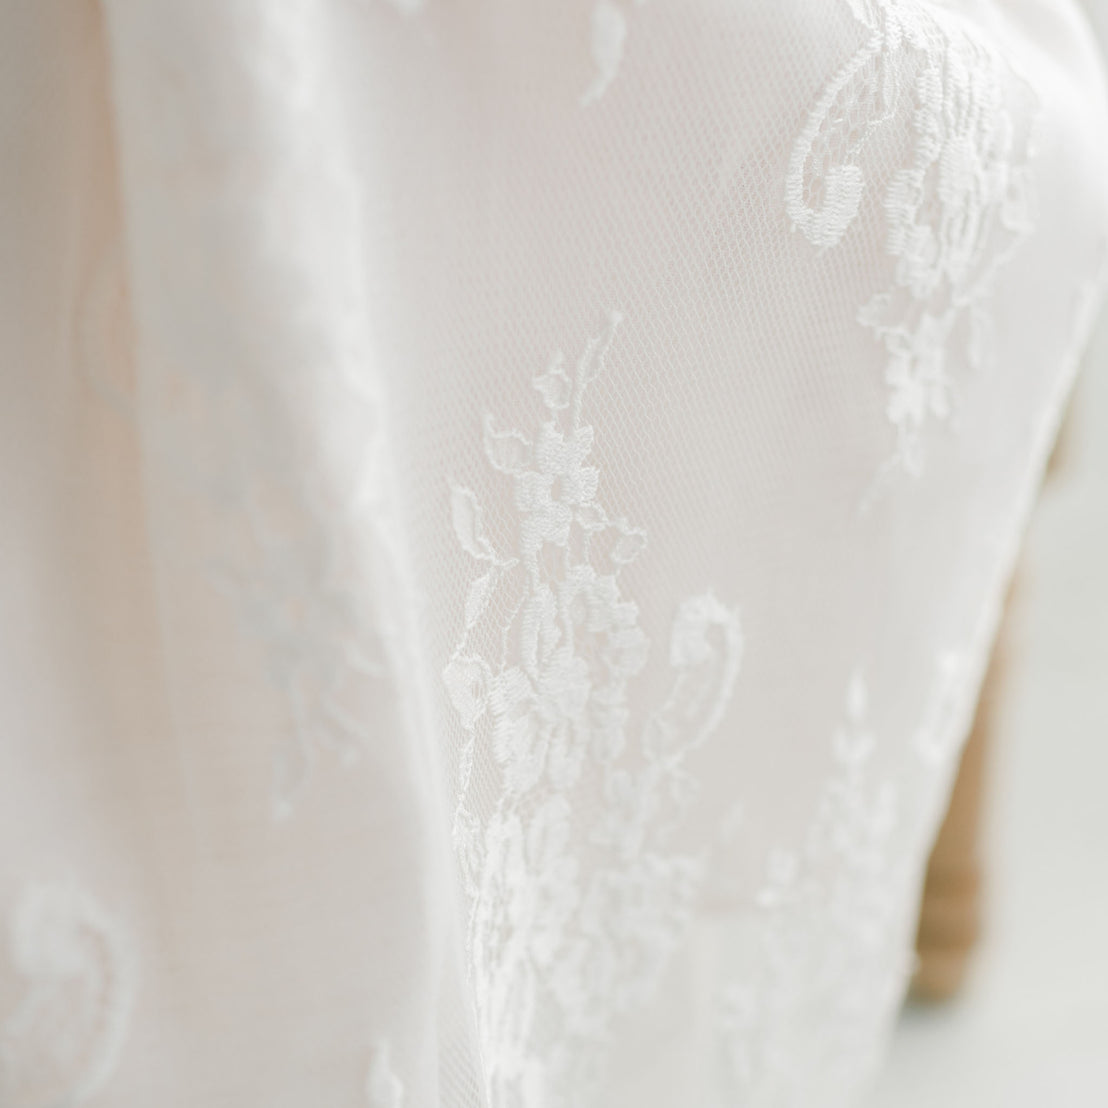 Close-up of a Juliette Romper Dress with intricate floral embroidery, displaying delicate and handcrafted craftsmanship against a soft, blurred background.